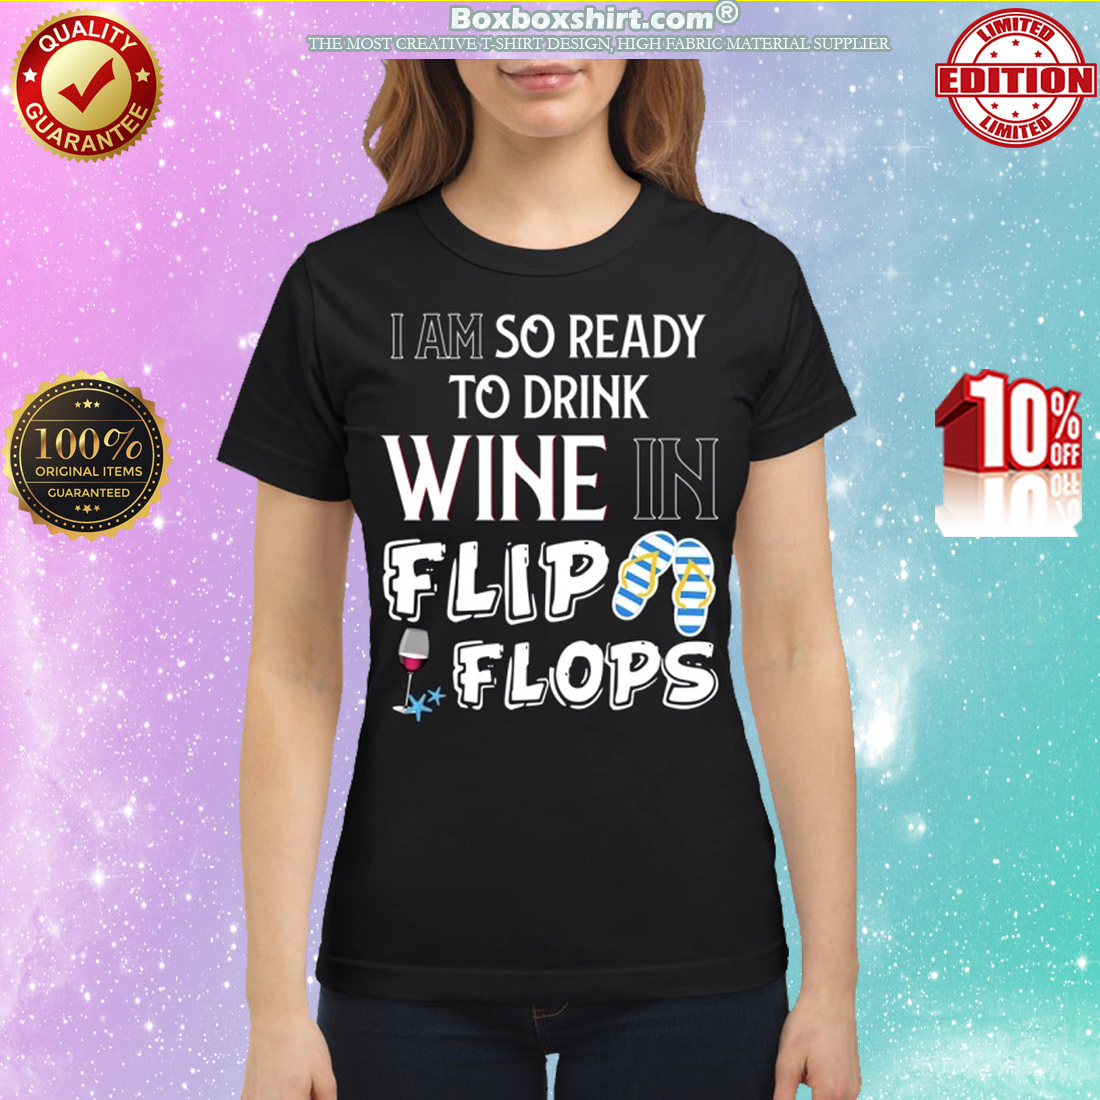 I am so ready to drink wine in flip flops classic shirt